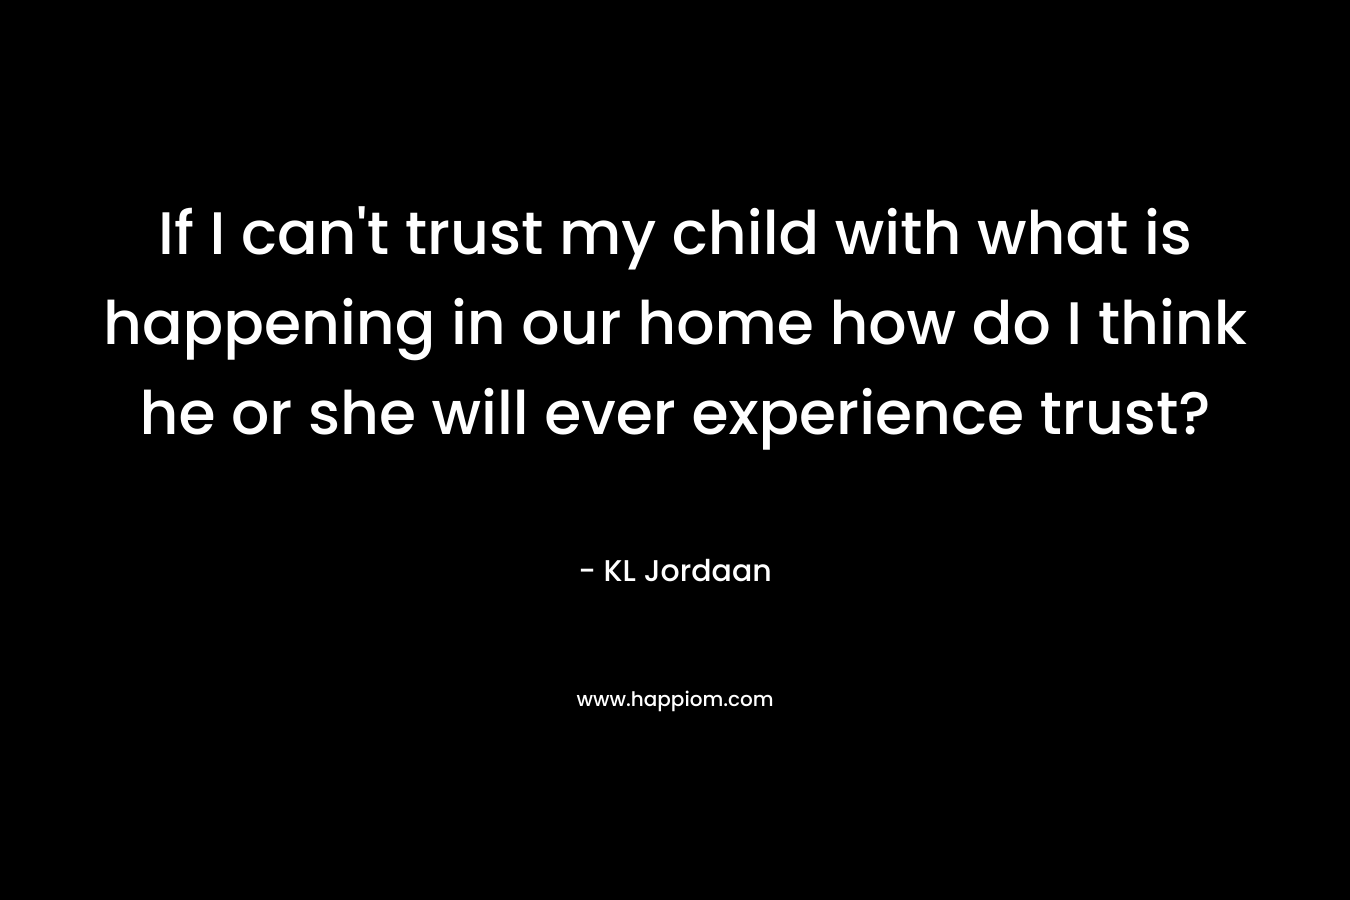 If I can't trust my child with what is happening in our home how do I think he or she will ever experience trust?